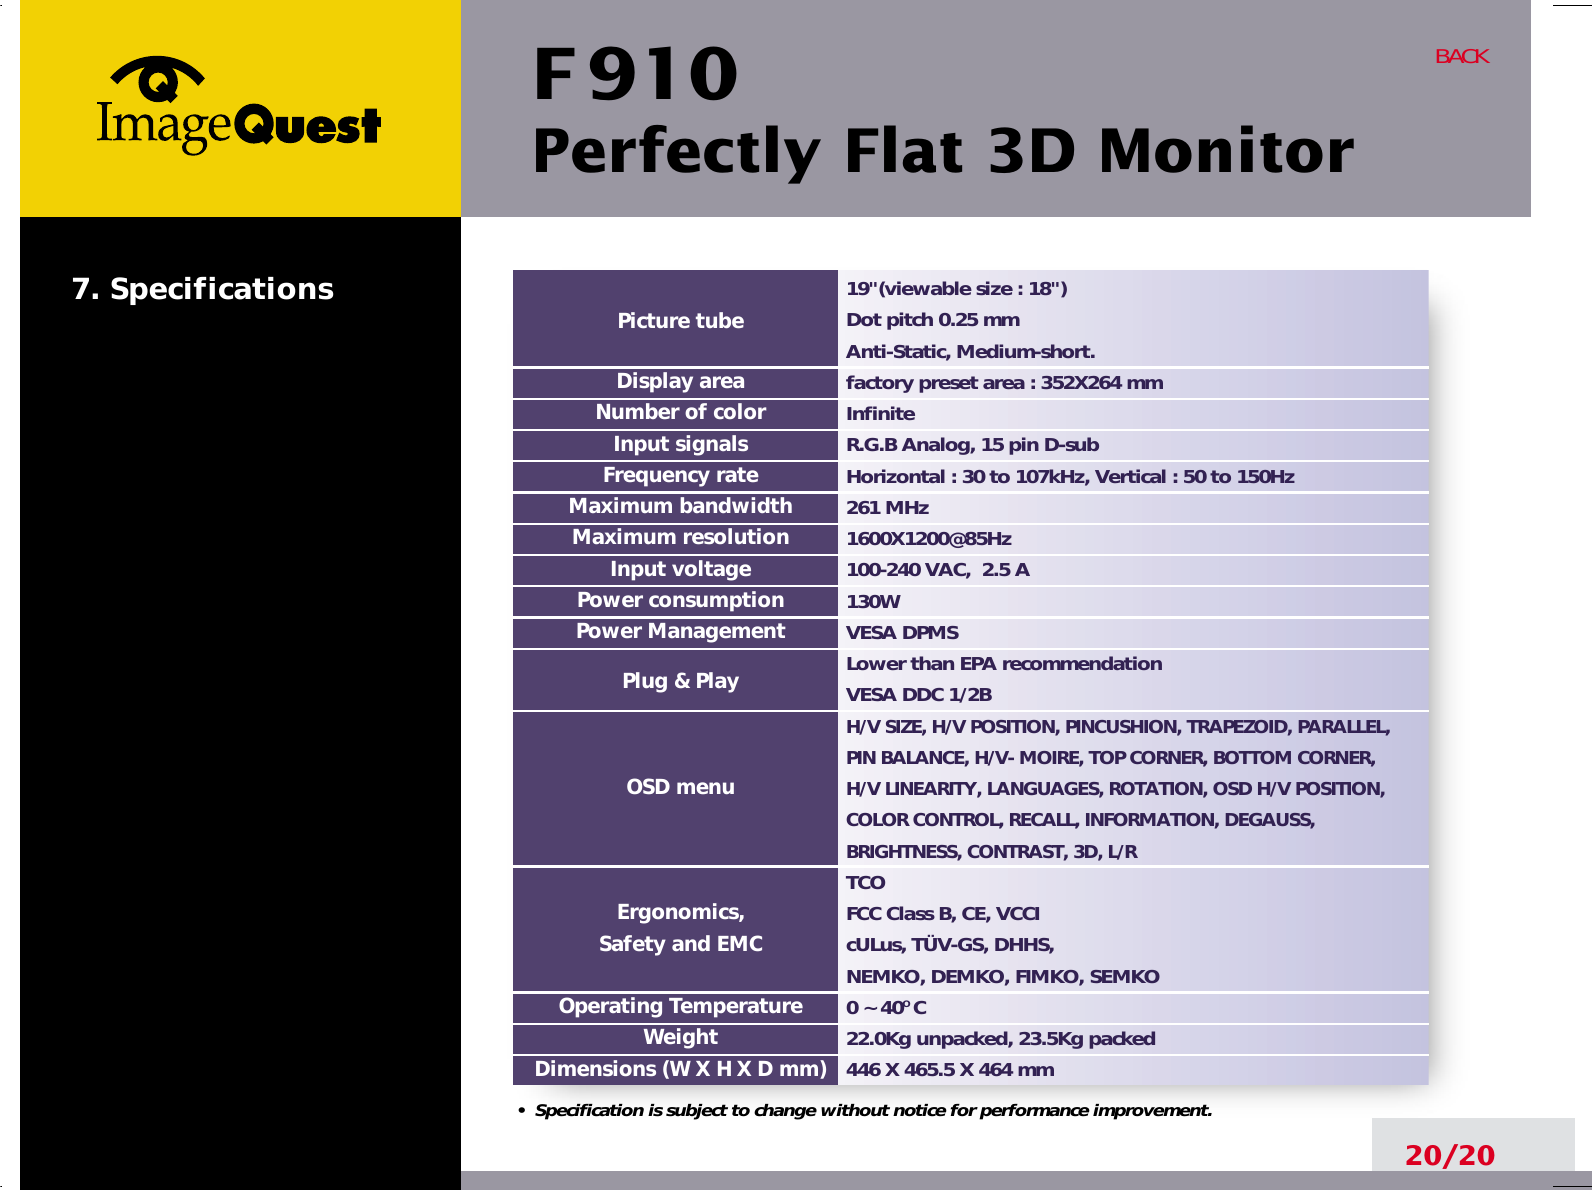 F 910Perfectly Flat 3D Monitor20/20BACK19&quot;(viewable size : 18&quot;)Dot pitch 0.25 mmAnti-Static, Medium-short.factory preset area : 352X264 mm InfiniteR.G.B Analog, 15 pin D-subHorizontal : 30 to 107kHz, Vertical : 50 to 150Hz261 MHz1600X1200@85Hz100-240 VAC,  2.5 A130WVESA DPMSLower than EPA recommendationVESA DDC 1/2BH/V SIZE, H/V POSITION, PINCUSHION, TRAPEZOID, PARALLEL, PIN BALANCE, H/V- MOIRE, TOP CORNER, BOTTOM CORNER, H/V LINEARITY, LANGUAGES, ROTATION, OSD H/V POSITION,COLOR CONTROL, RECALL, INFORMATION, DEGAUSS,BRIGHTNESS, CONTRAST, 3D, L/RTCOFCC Class B, CE, VCCIcULus, TÜV-GS, DHHS, NEMKO, DEMKO, FIMKO, SEMKO 0 ~ 40O C22.0Kg unpacked, 23.5Kg packed446 X 465.5 X 464 mmPicture tubeDisplay areaNumber of colorInput signalsFrequency rateMaximum bandwidthMaximum resolutionInput voltagePower consumptionPower ManagementPlug &amp; PlayOSD menuErgonomics,Safety and EMCOperating TemperatureWeightDimensions (W X H X D mm)•  Specification is subject to change without notice for performance improvement.7. Specifications